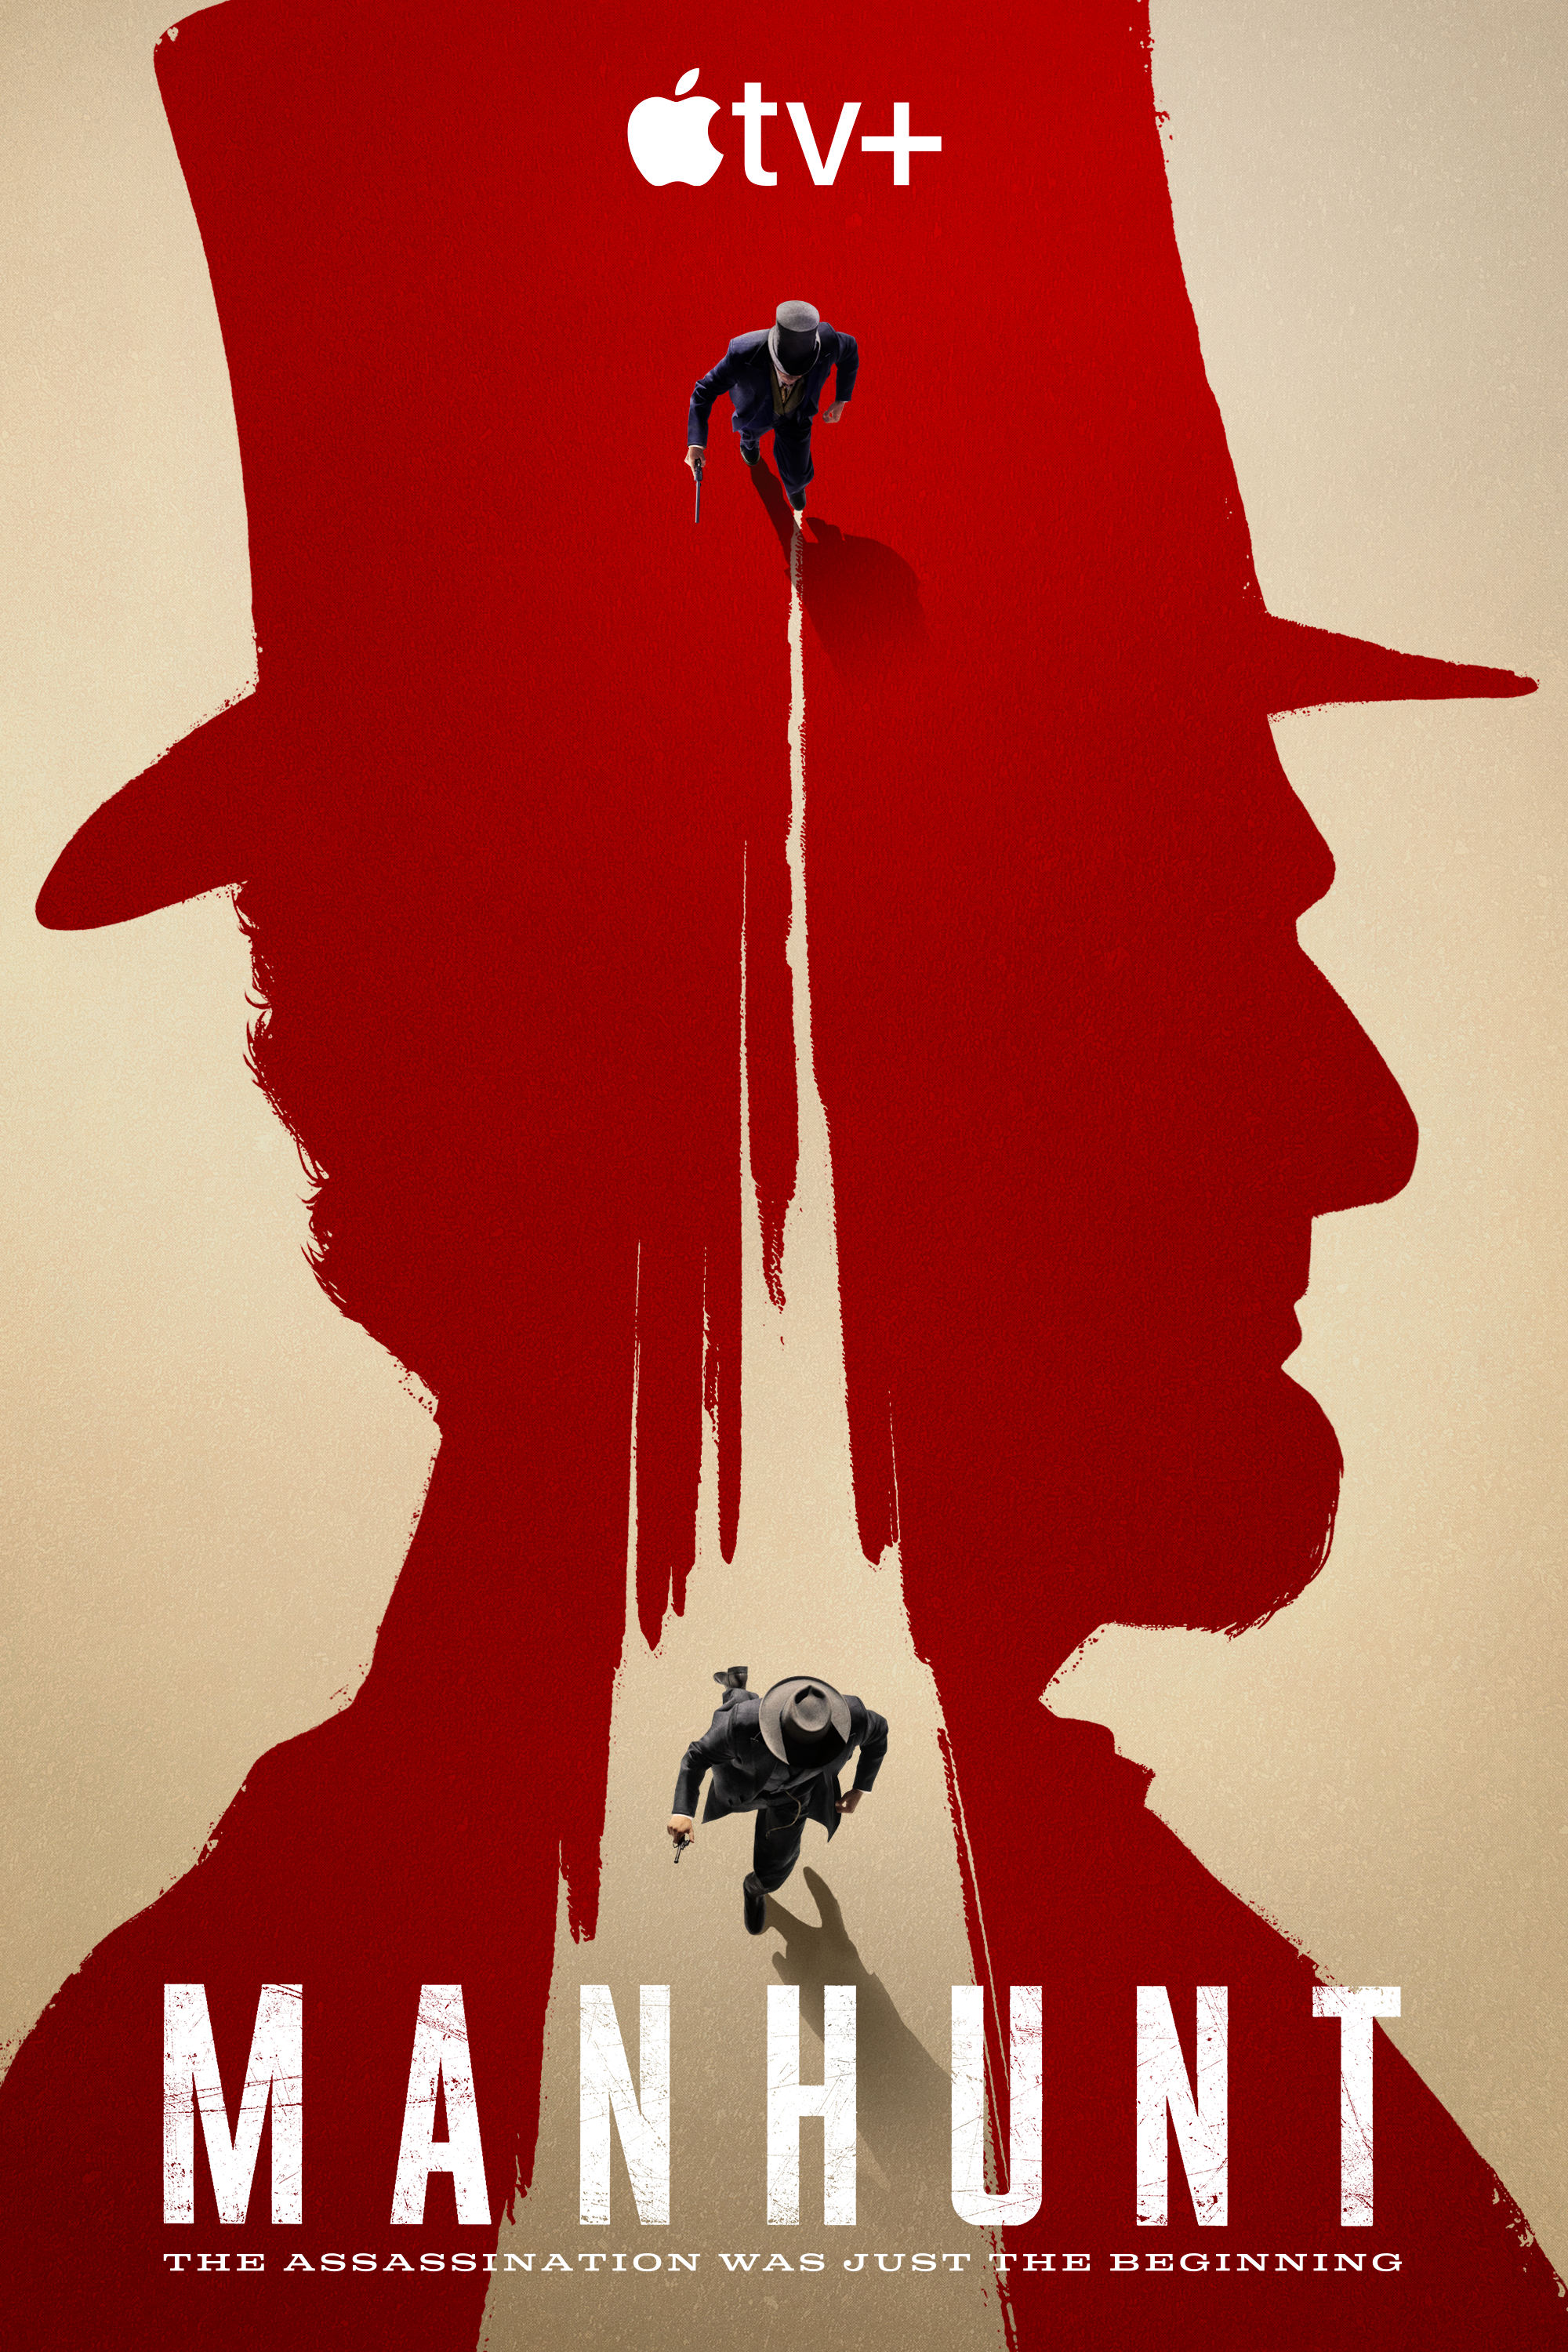 A poster for the TV show Manhunt depicting a man chasing John Wilkes Booth in the silhouette of Abraham Lincoln.